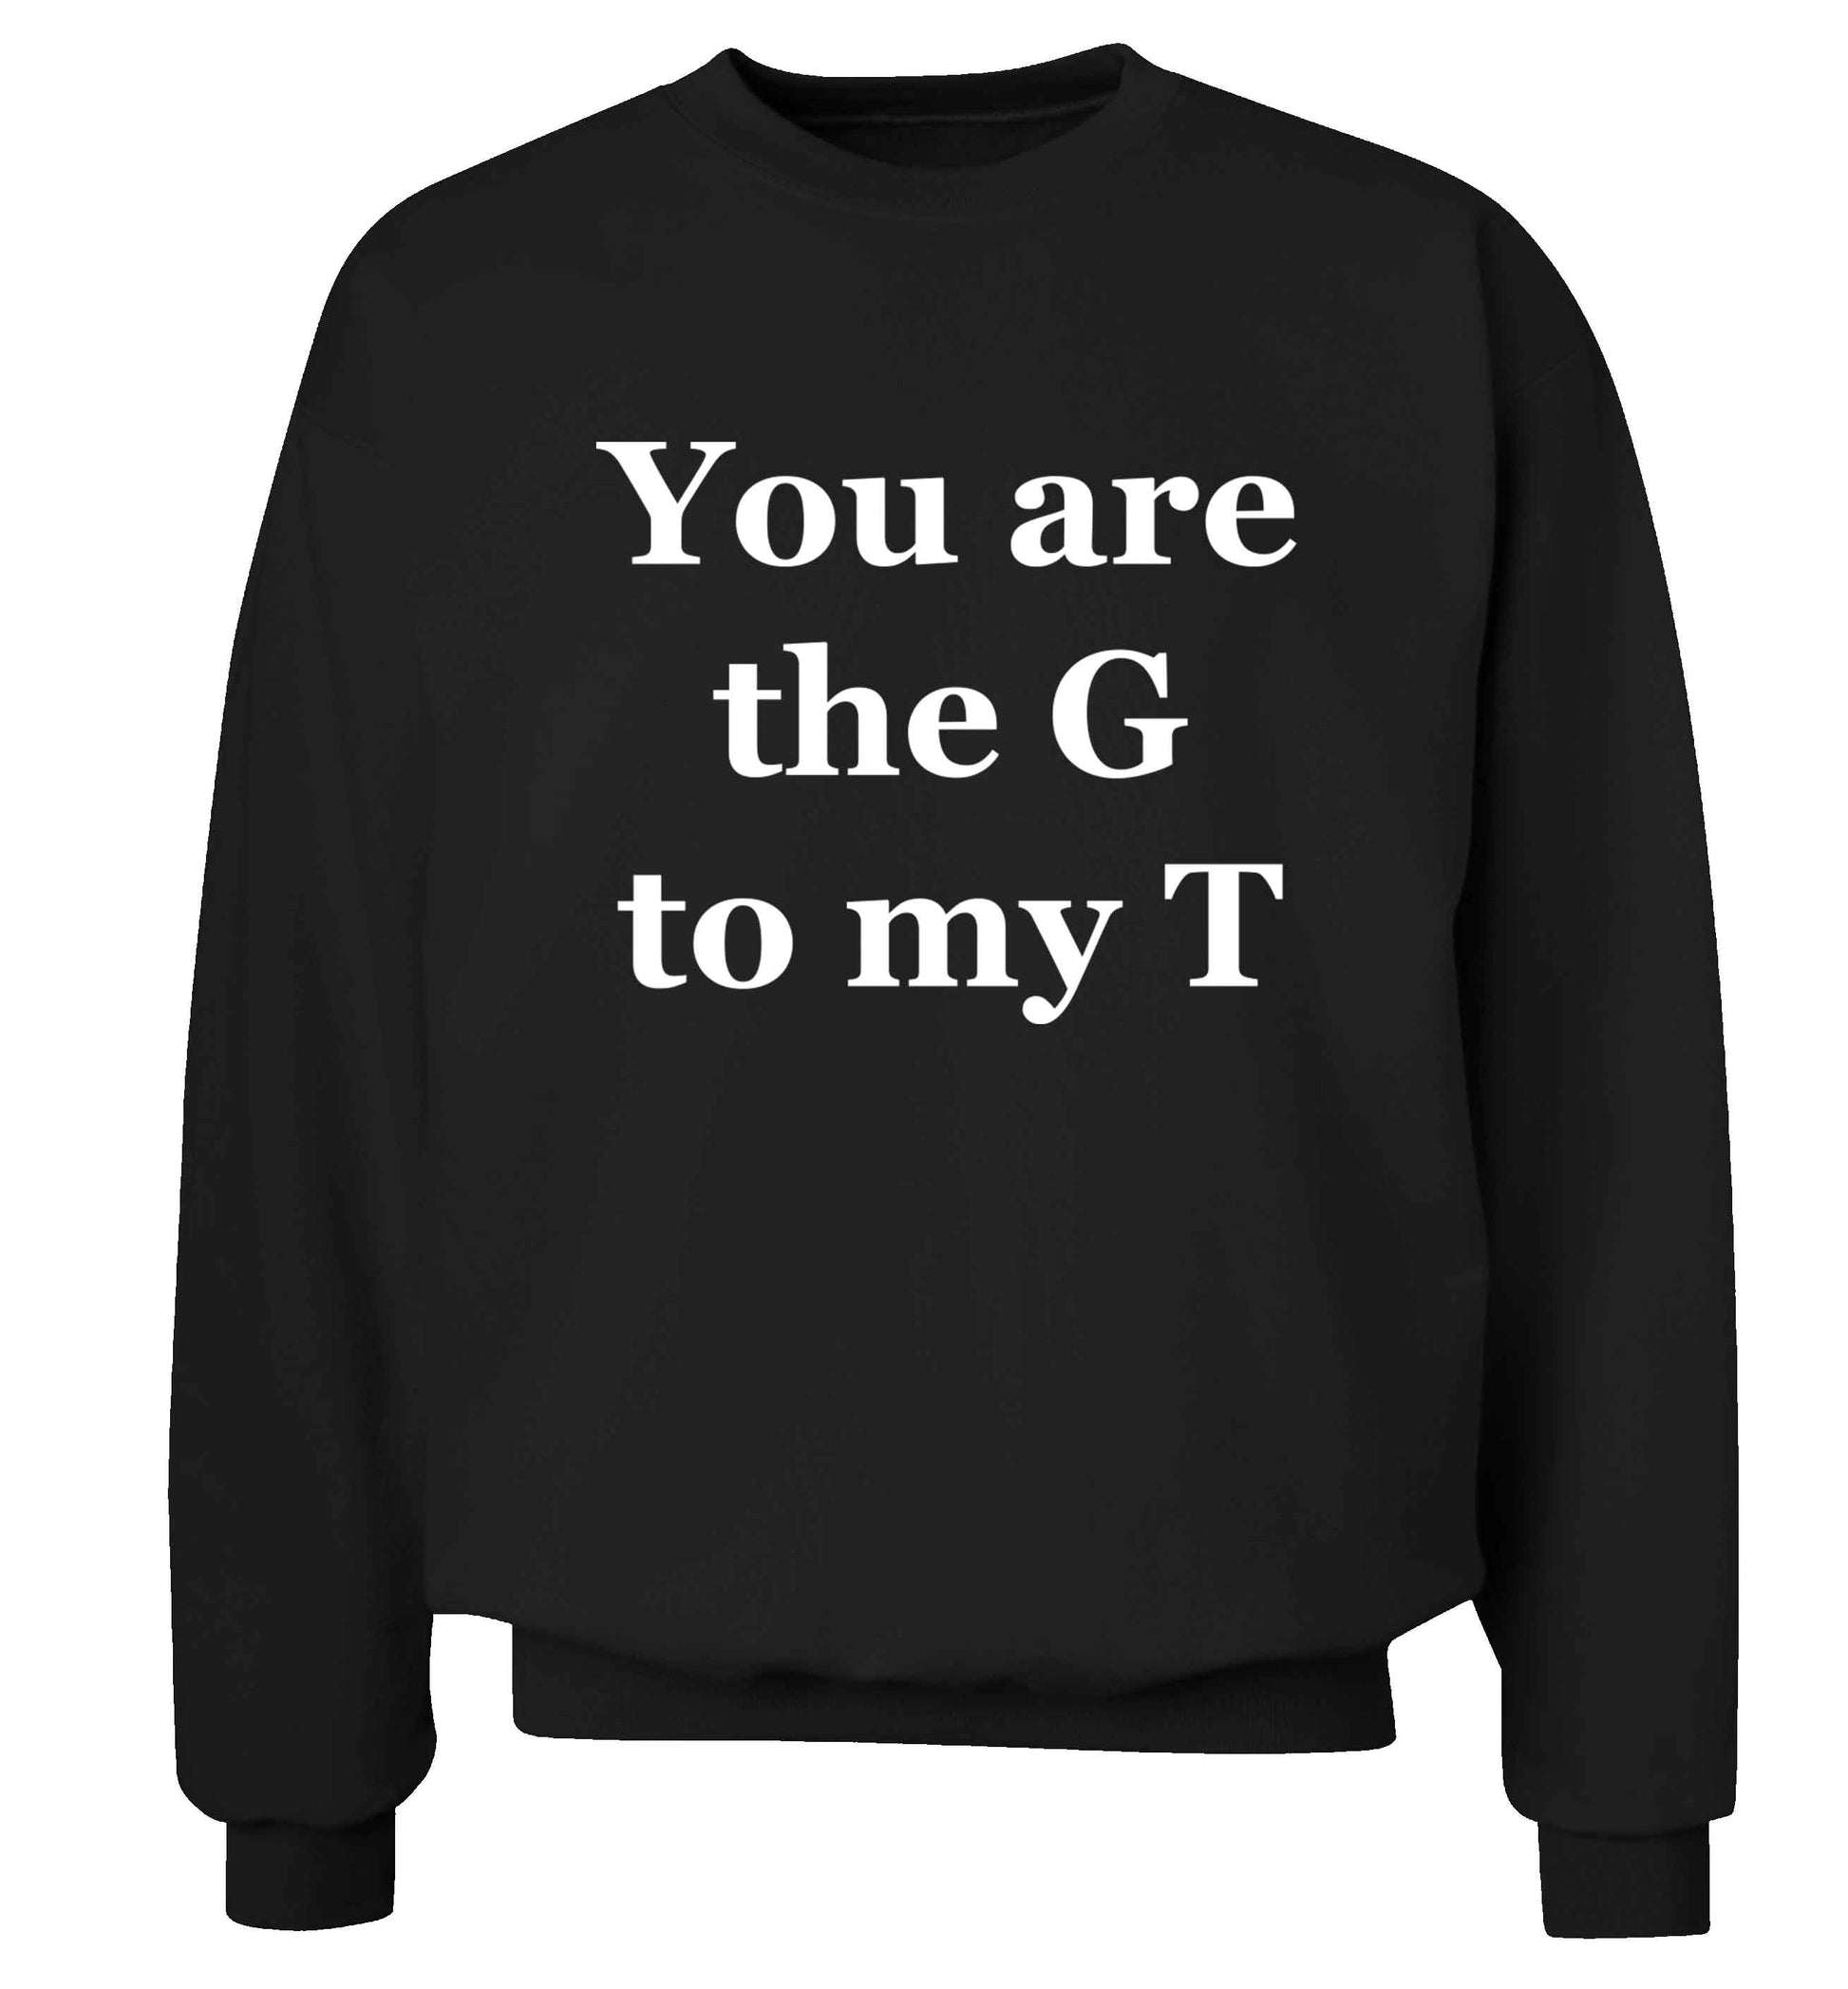 You are the G to my T Adult's unisex black Sweater 2XL